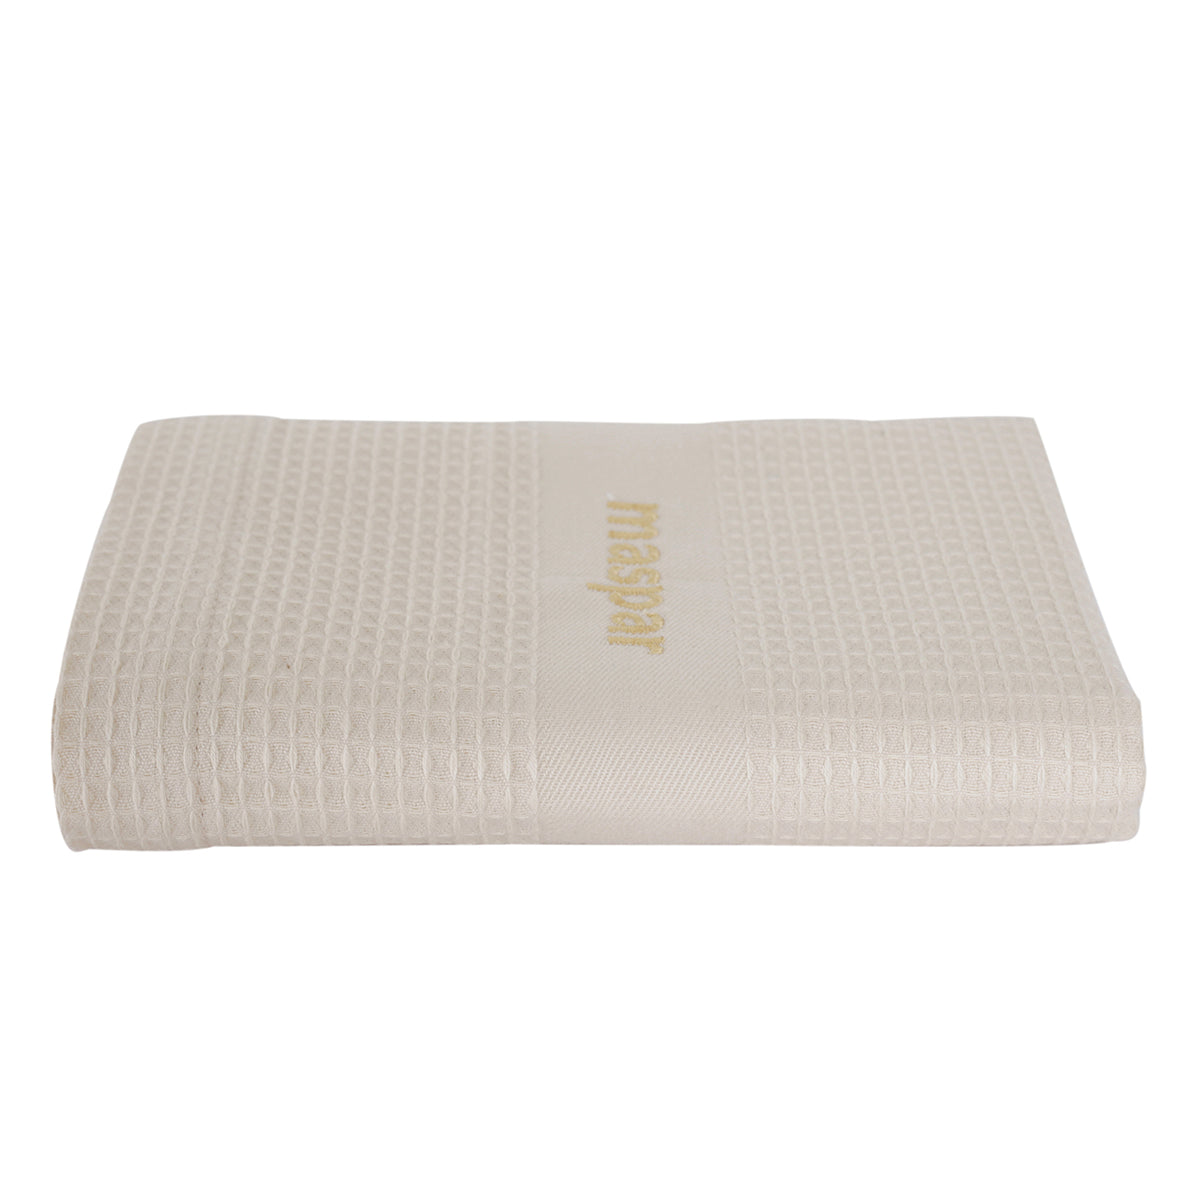 Catalina Waffle Antimicrobial Antifungal Super Absorbent Quick Dry Gym/Travel Cream Towel